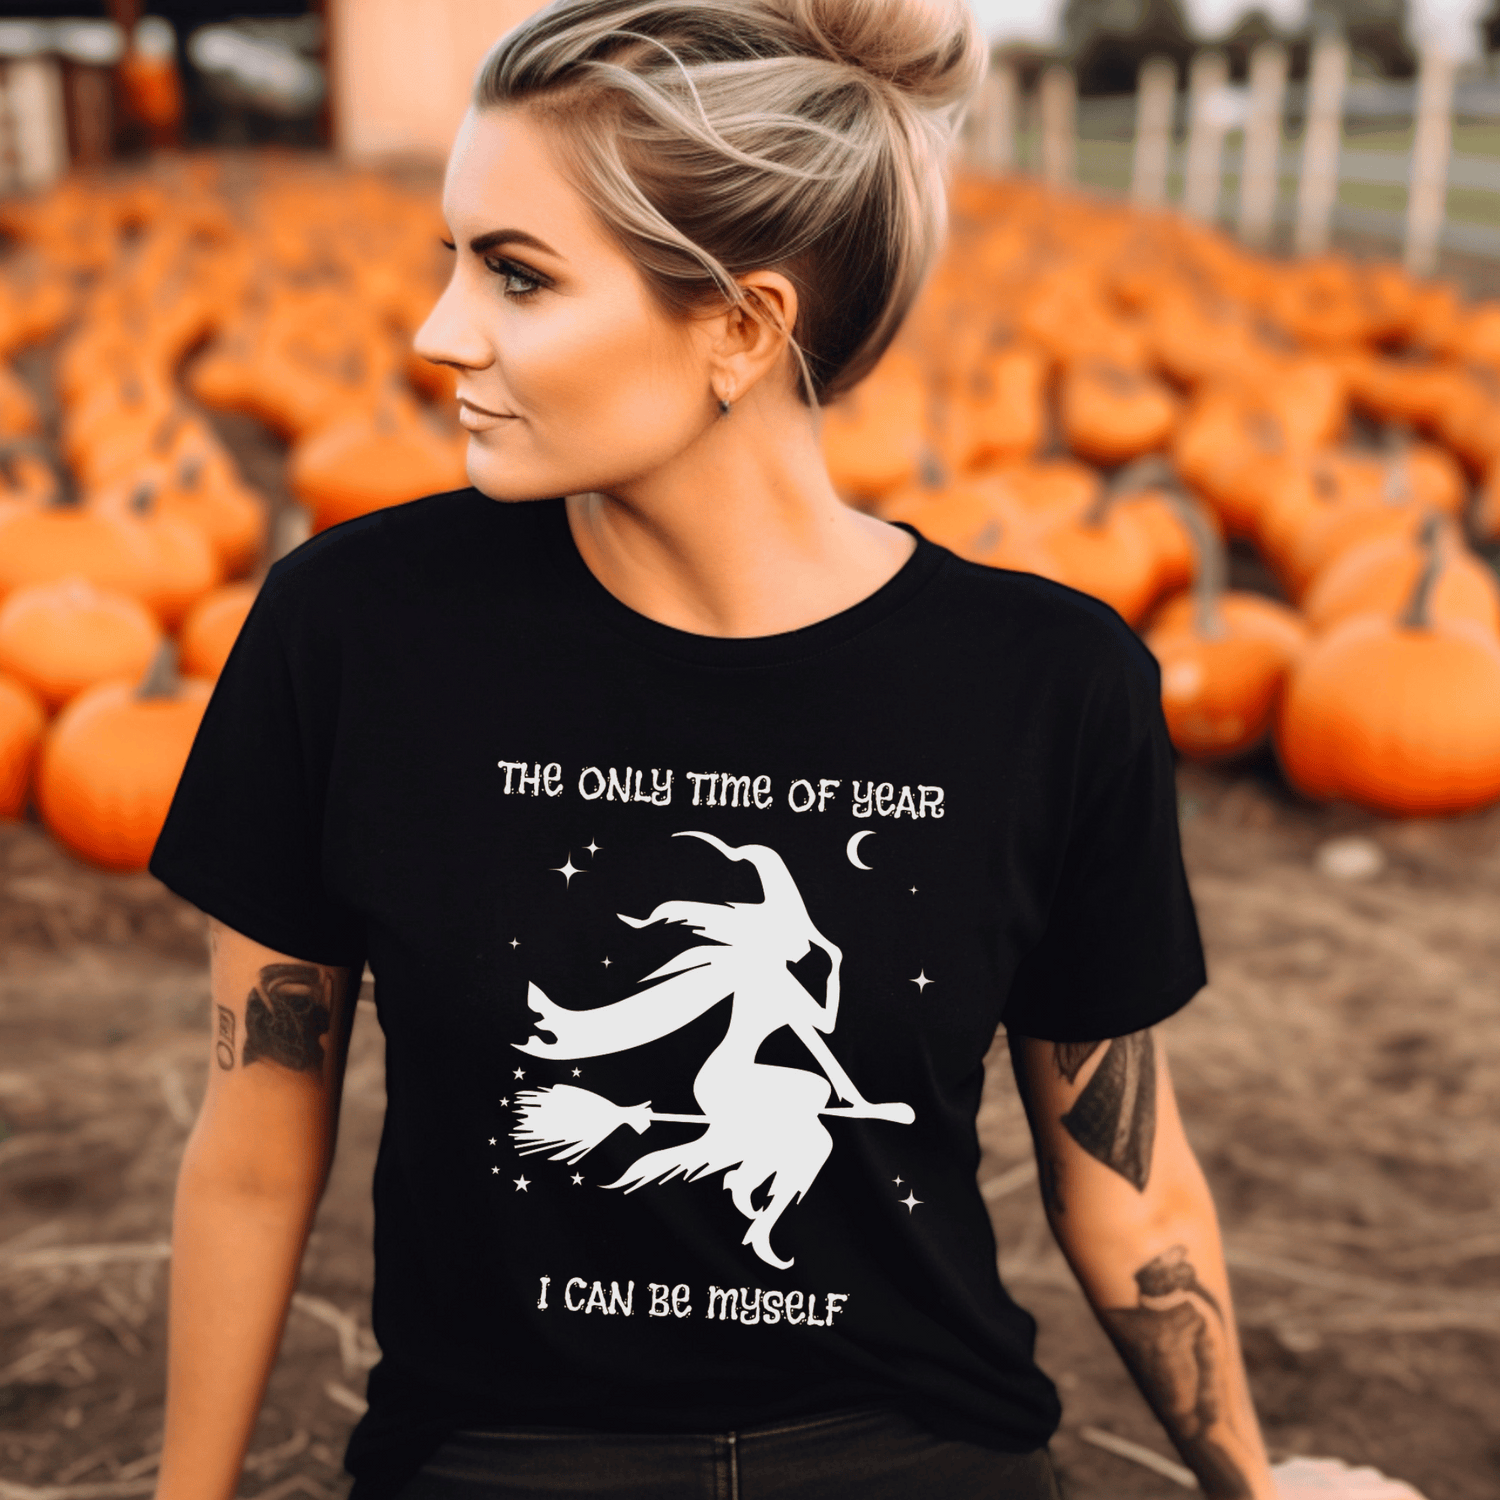 Women's black halloween t-shirt with printed elegant witch on a broom stick design